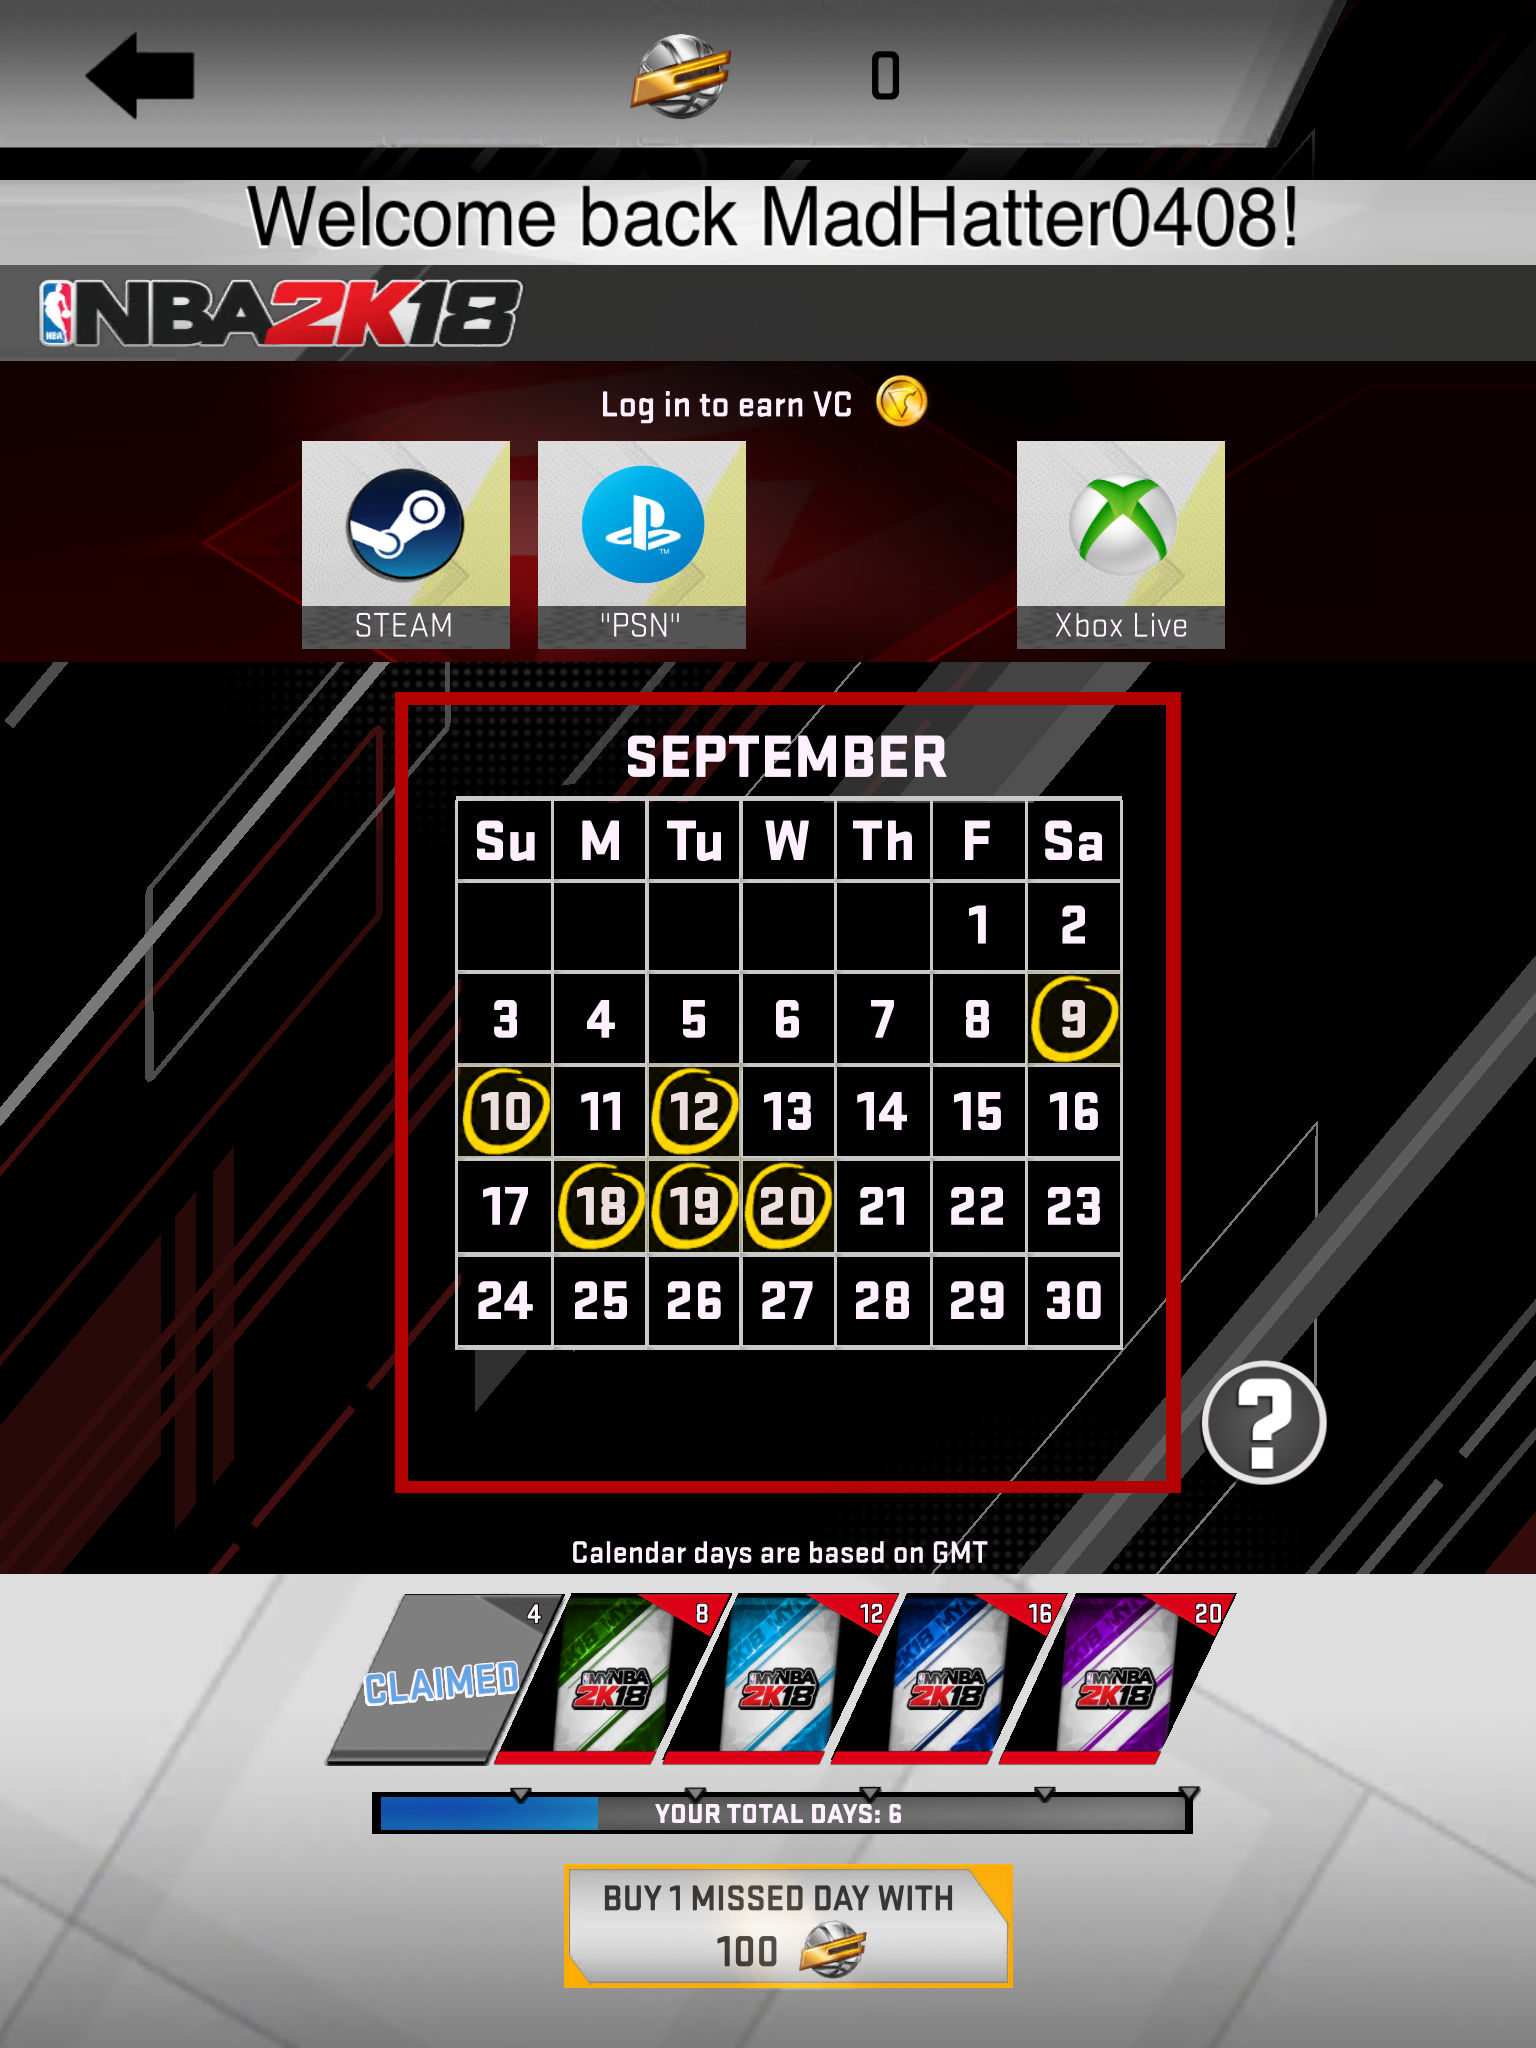 How to Earn VC for NBA 2K18 in My NBA 2K18